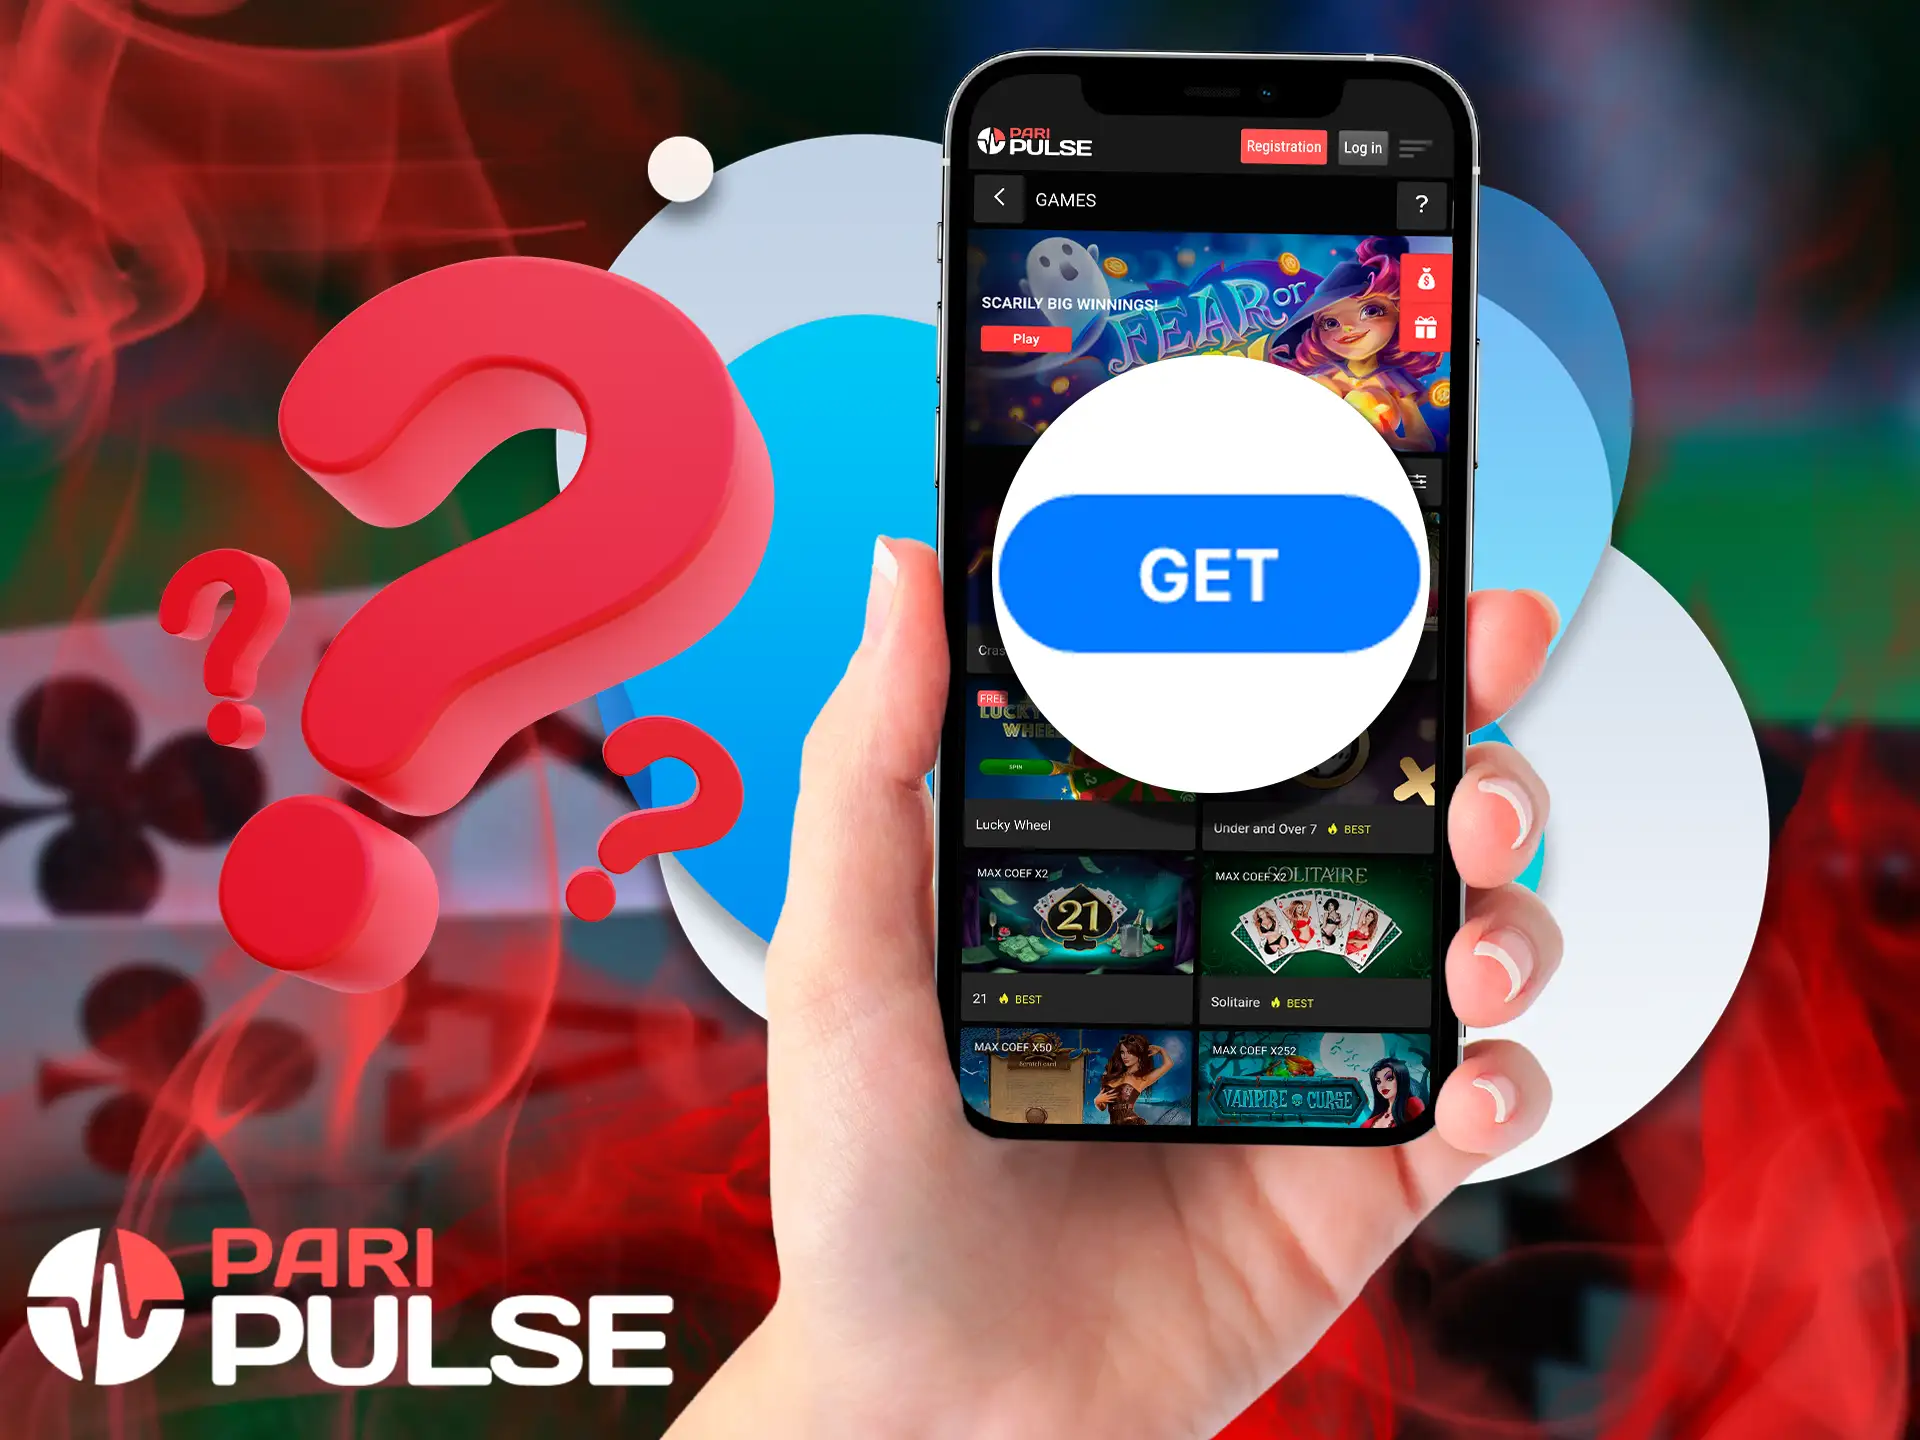 Follow the simple steps to install the official PariPulse software.